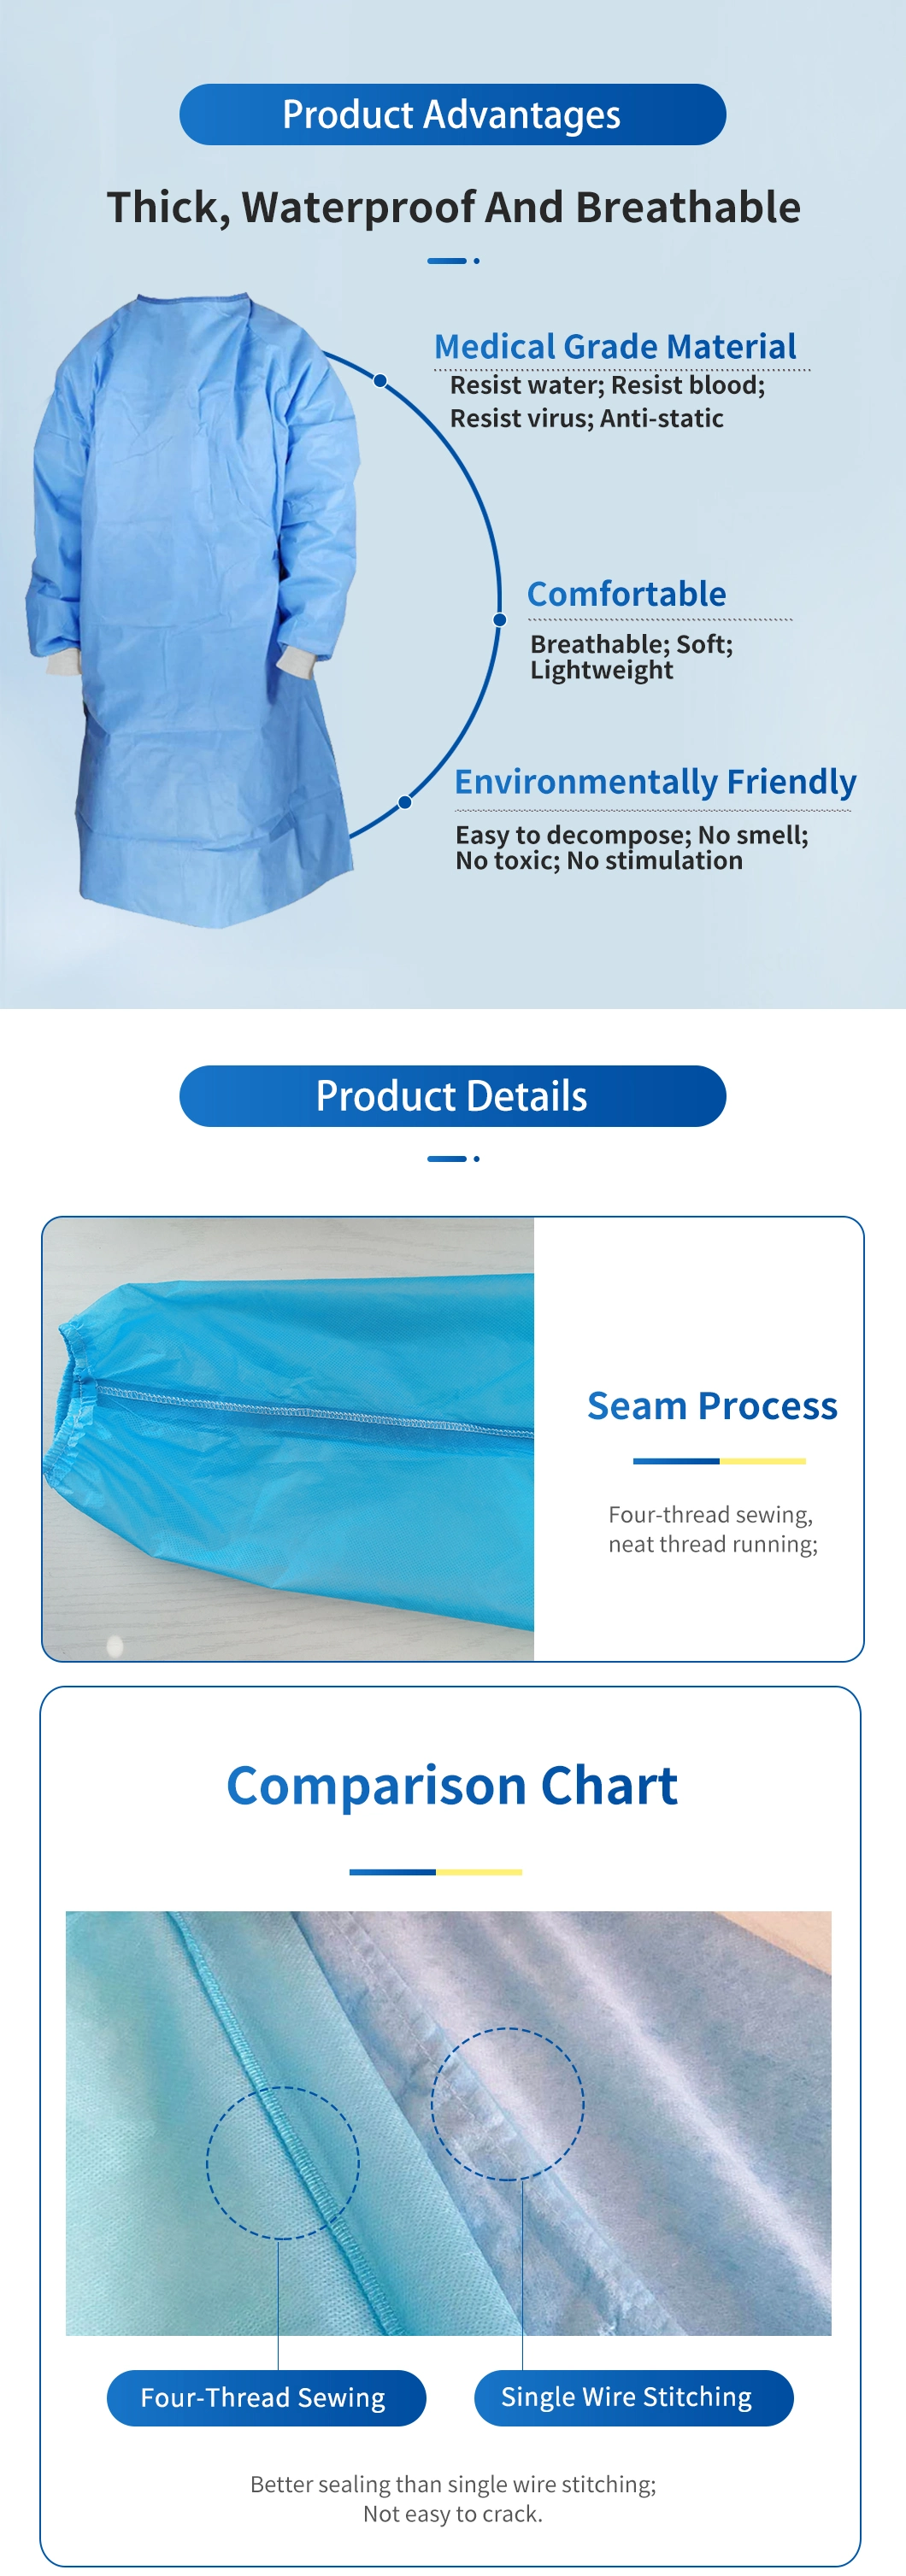 Disposable Gown Hospital Use Medical Surgical Level 1 Blue with Seam Tape Isolation